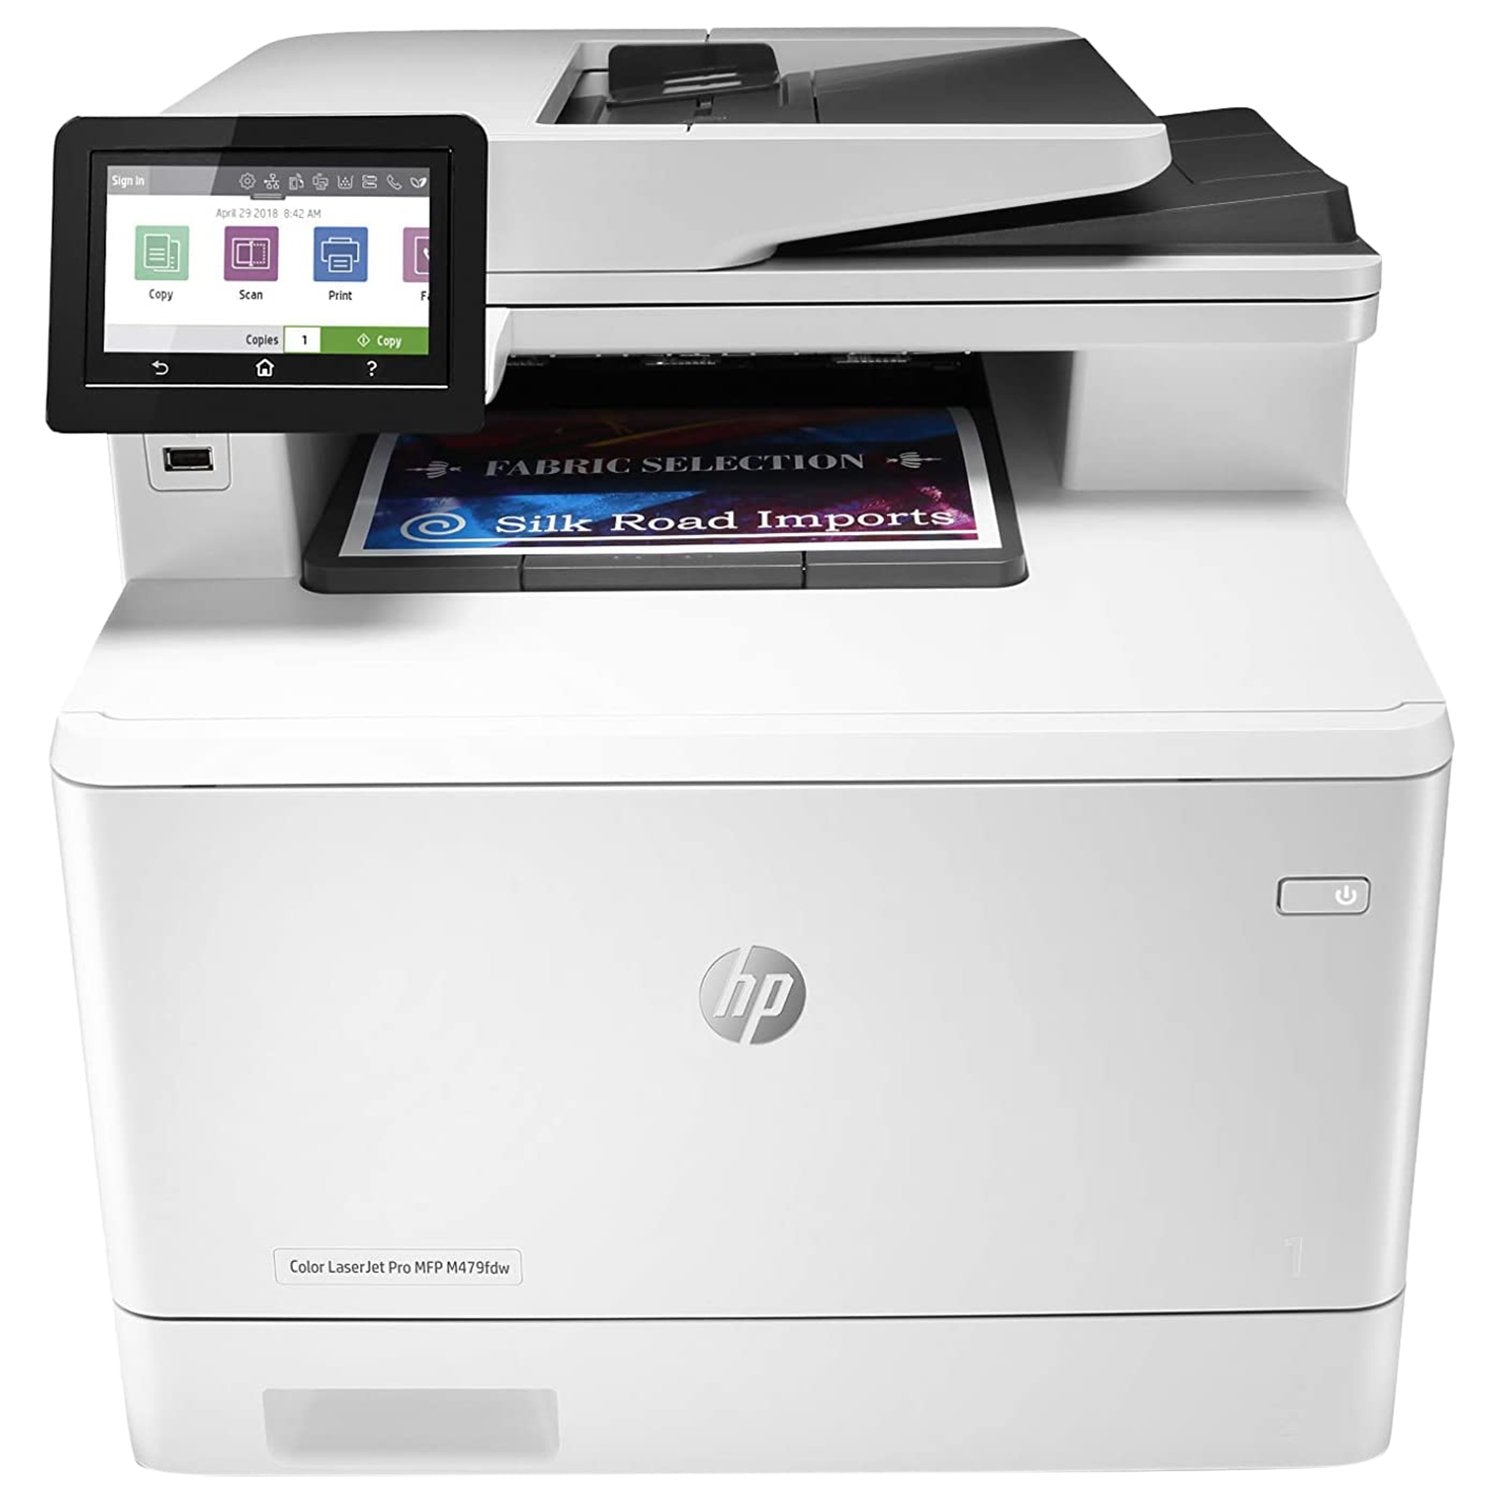 Absolute Toner Brand New HP Color LaserJet Pro MFP M479fdw Color Laser Multifunction Printer For Office Business and Personal Use Laser Printer